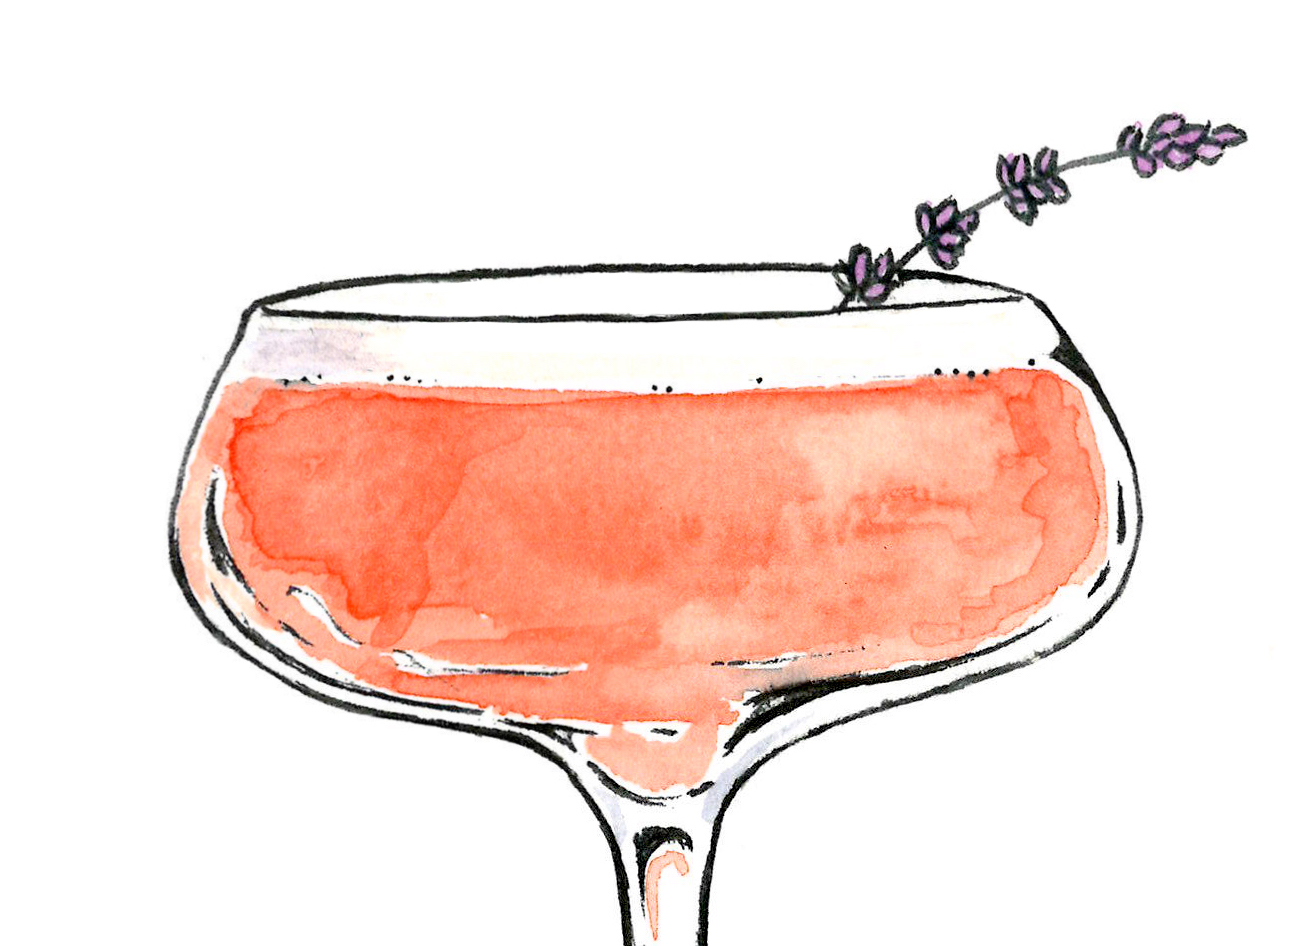 Illustration of historic alcoholic glassware Coup